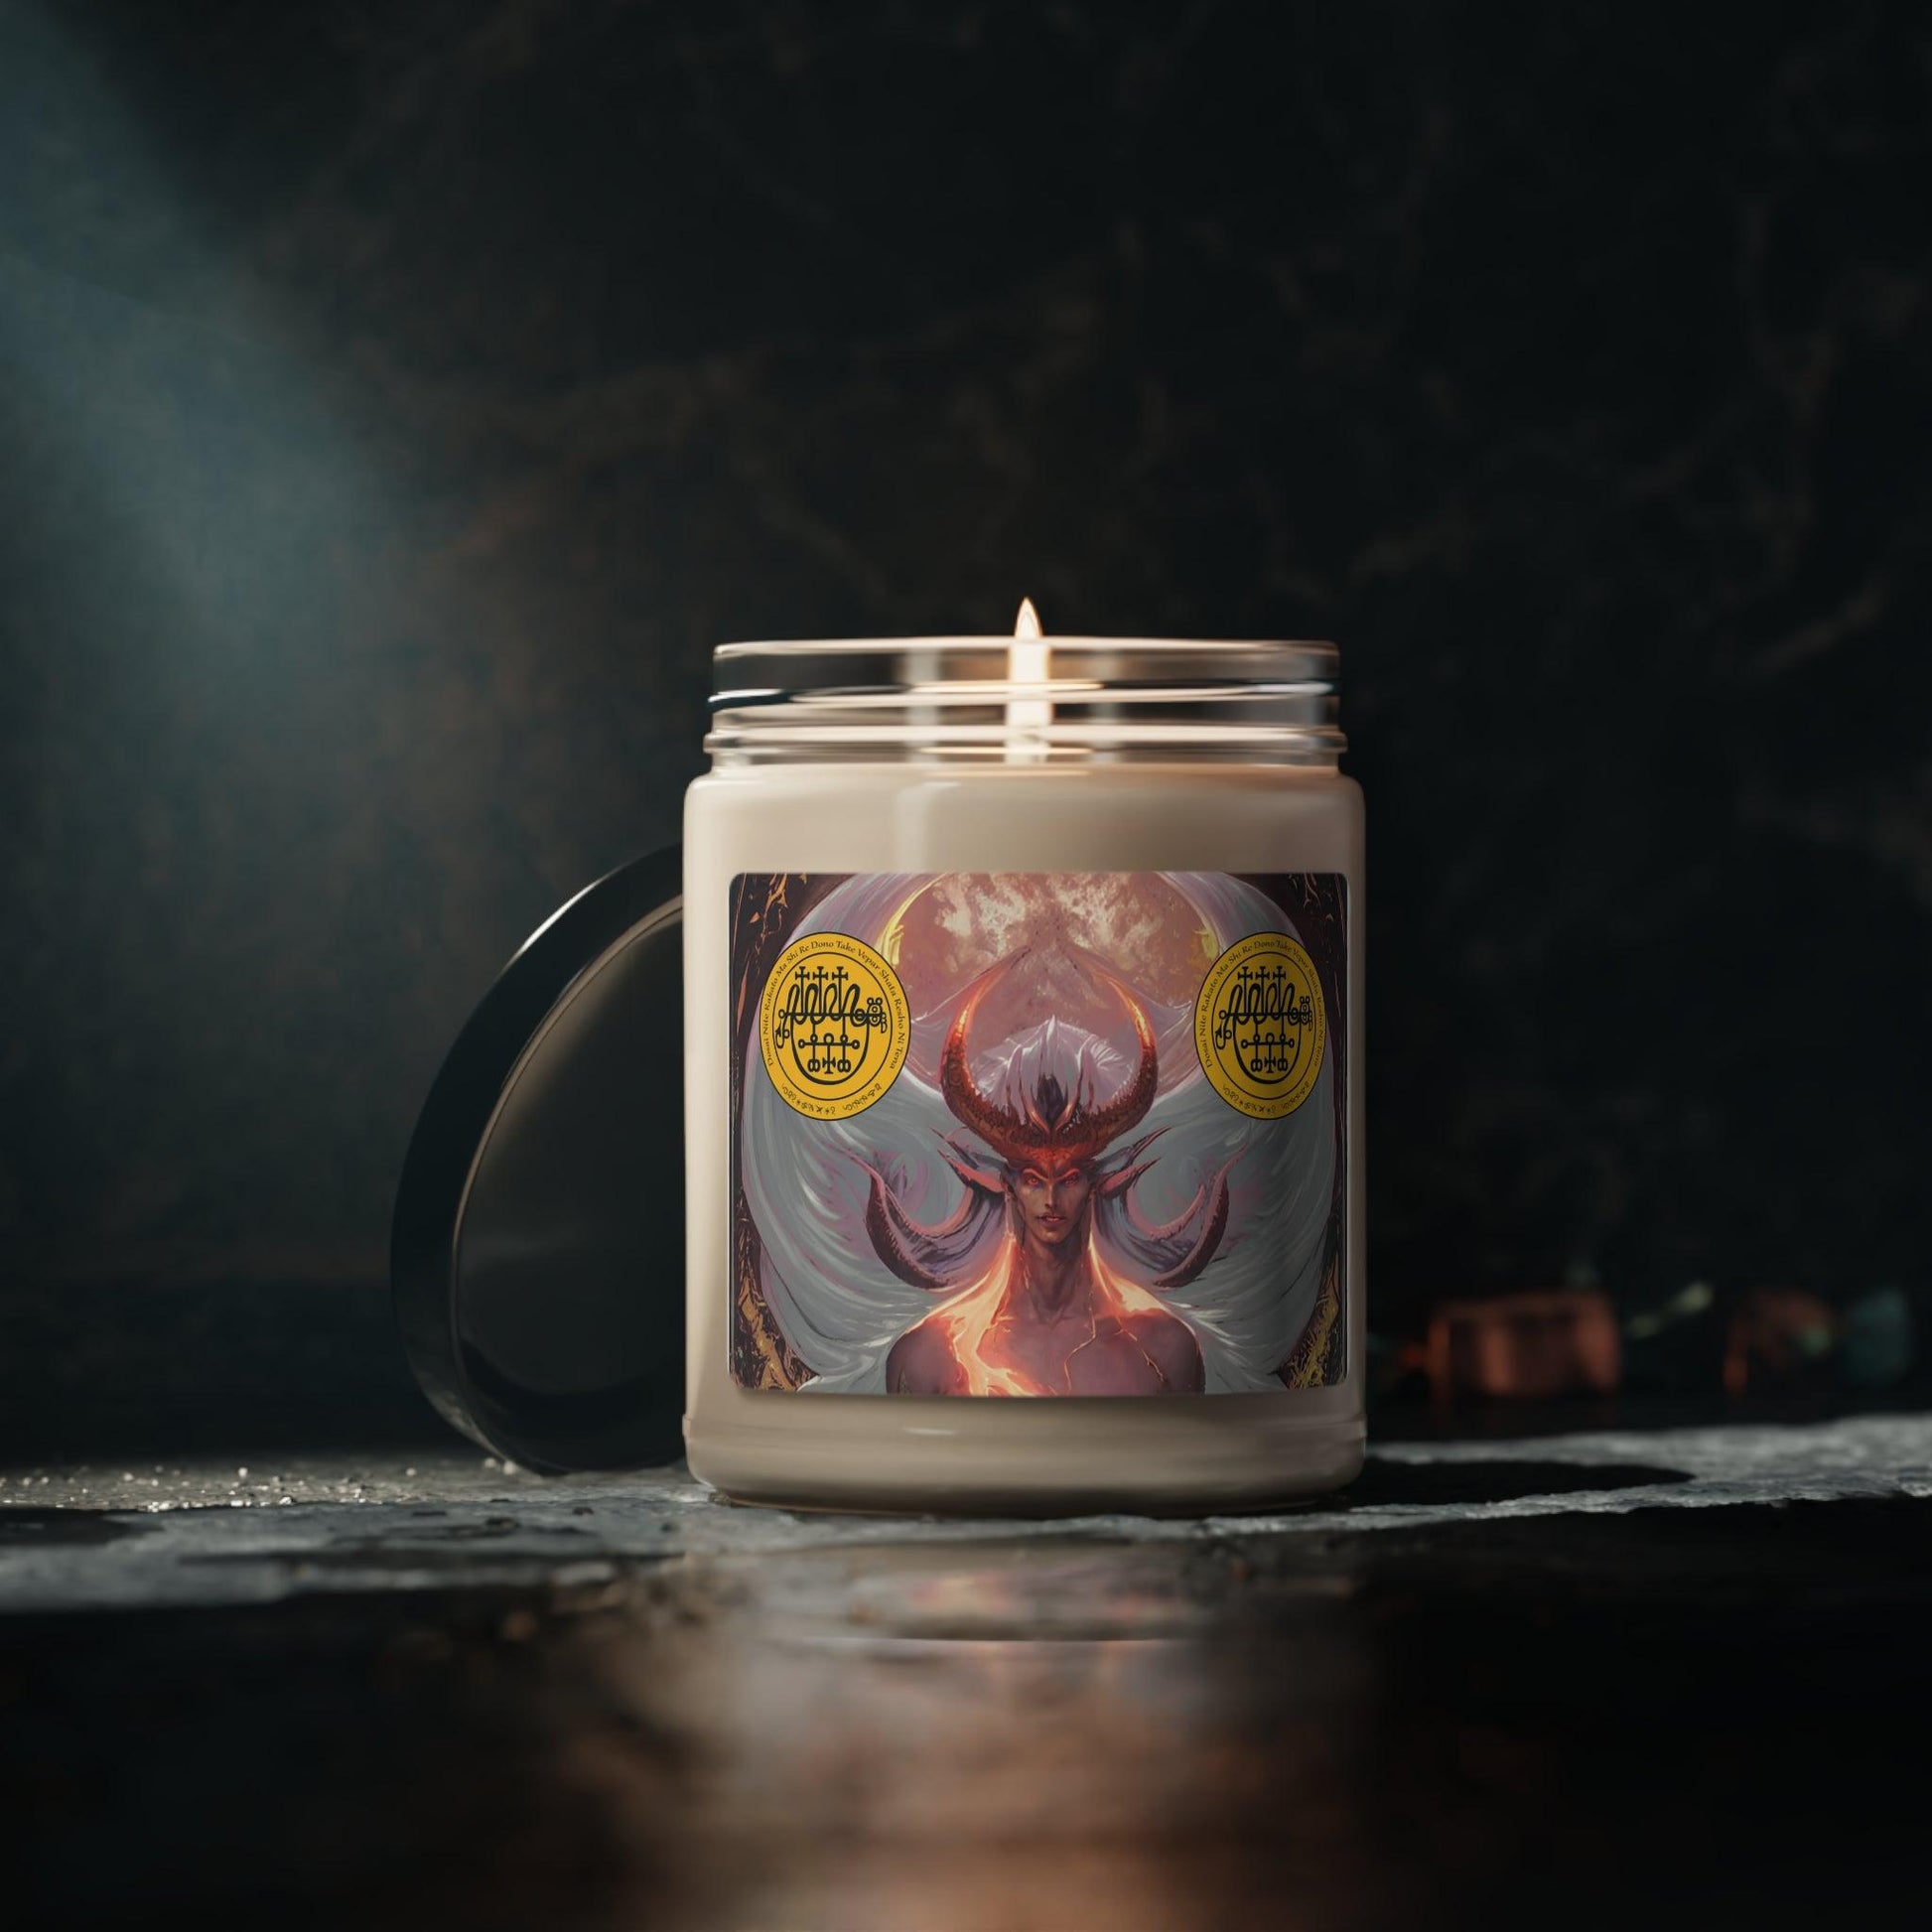 Demon-Vepar-Altar-Scented-Soy-Candle-for-offerings-rituals-initiations-o-praying-and-medtation-20